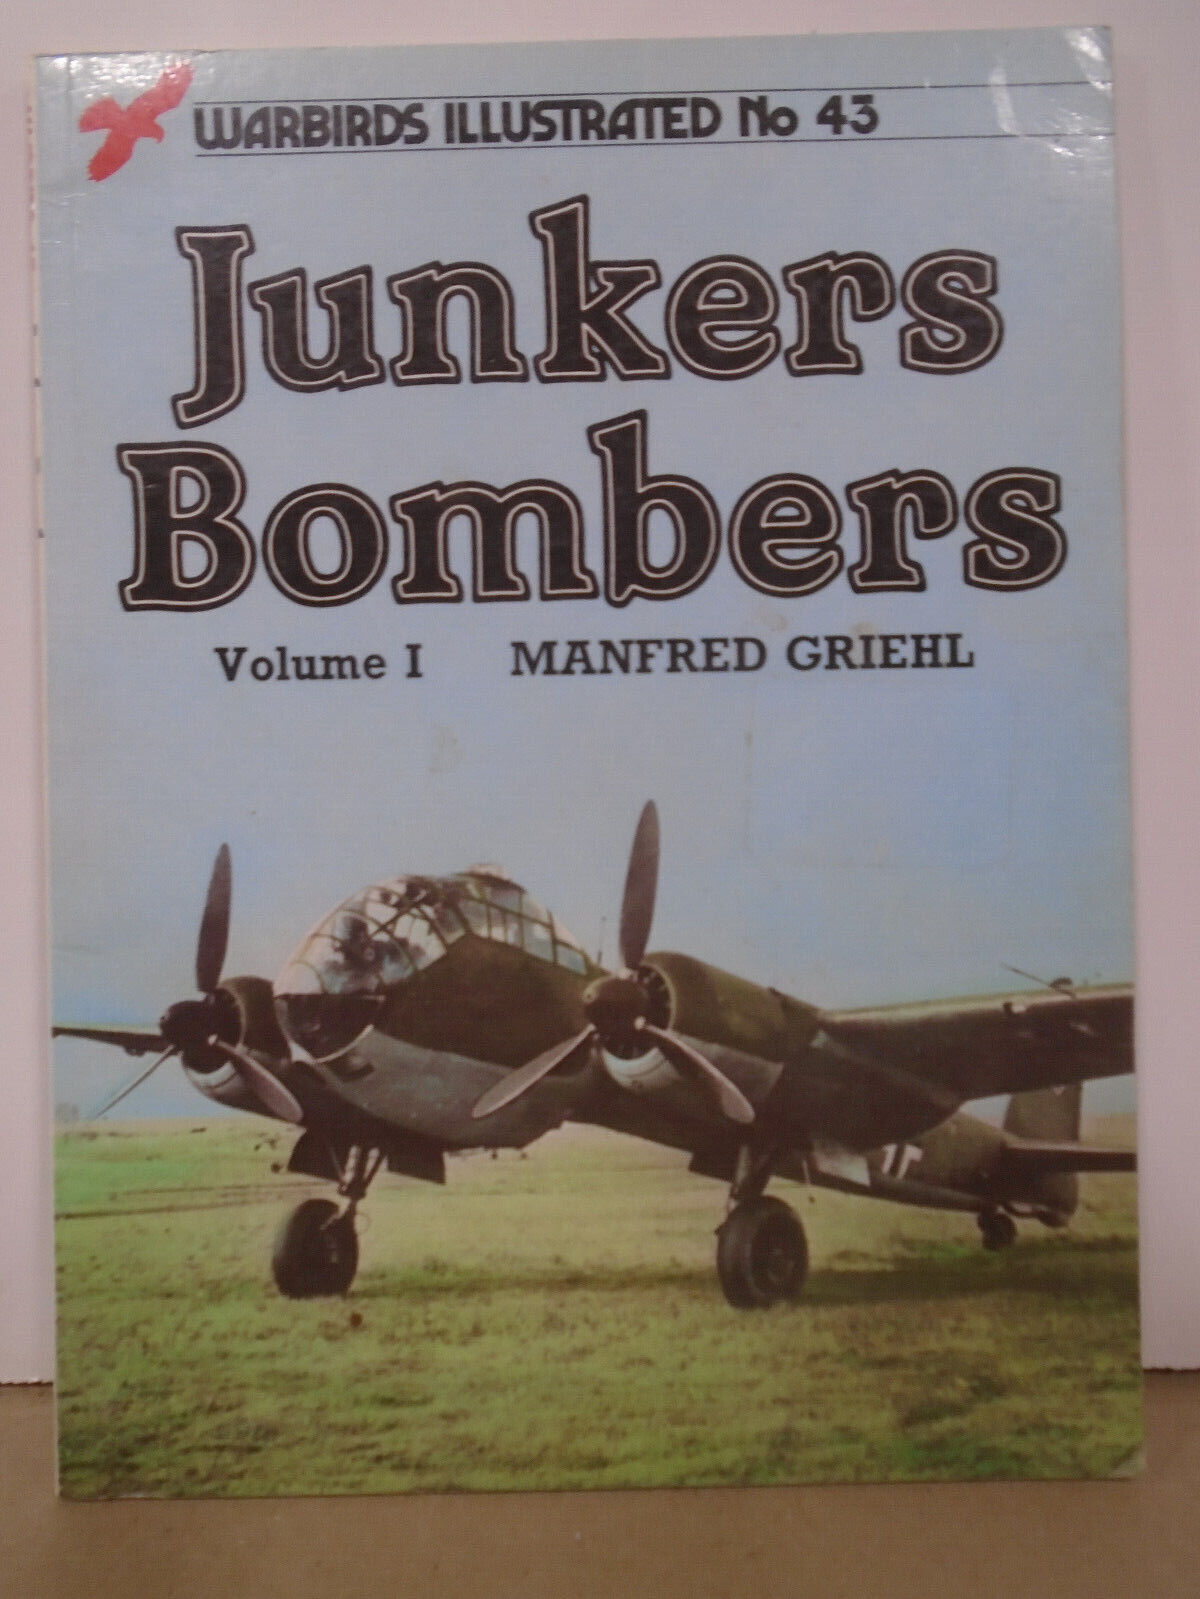 WARBIRDS ILLUSTRATED #43 JUNKERS BOMBERS VOLUME 1 BY MANFRED GRIEHL